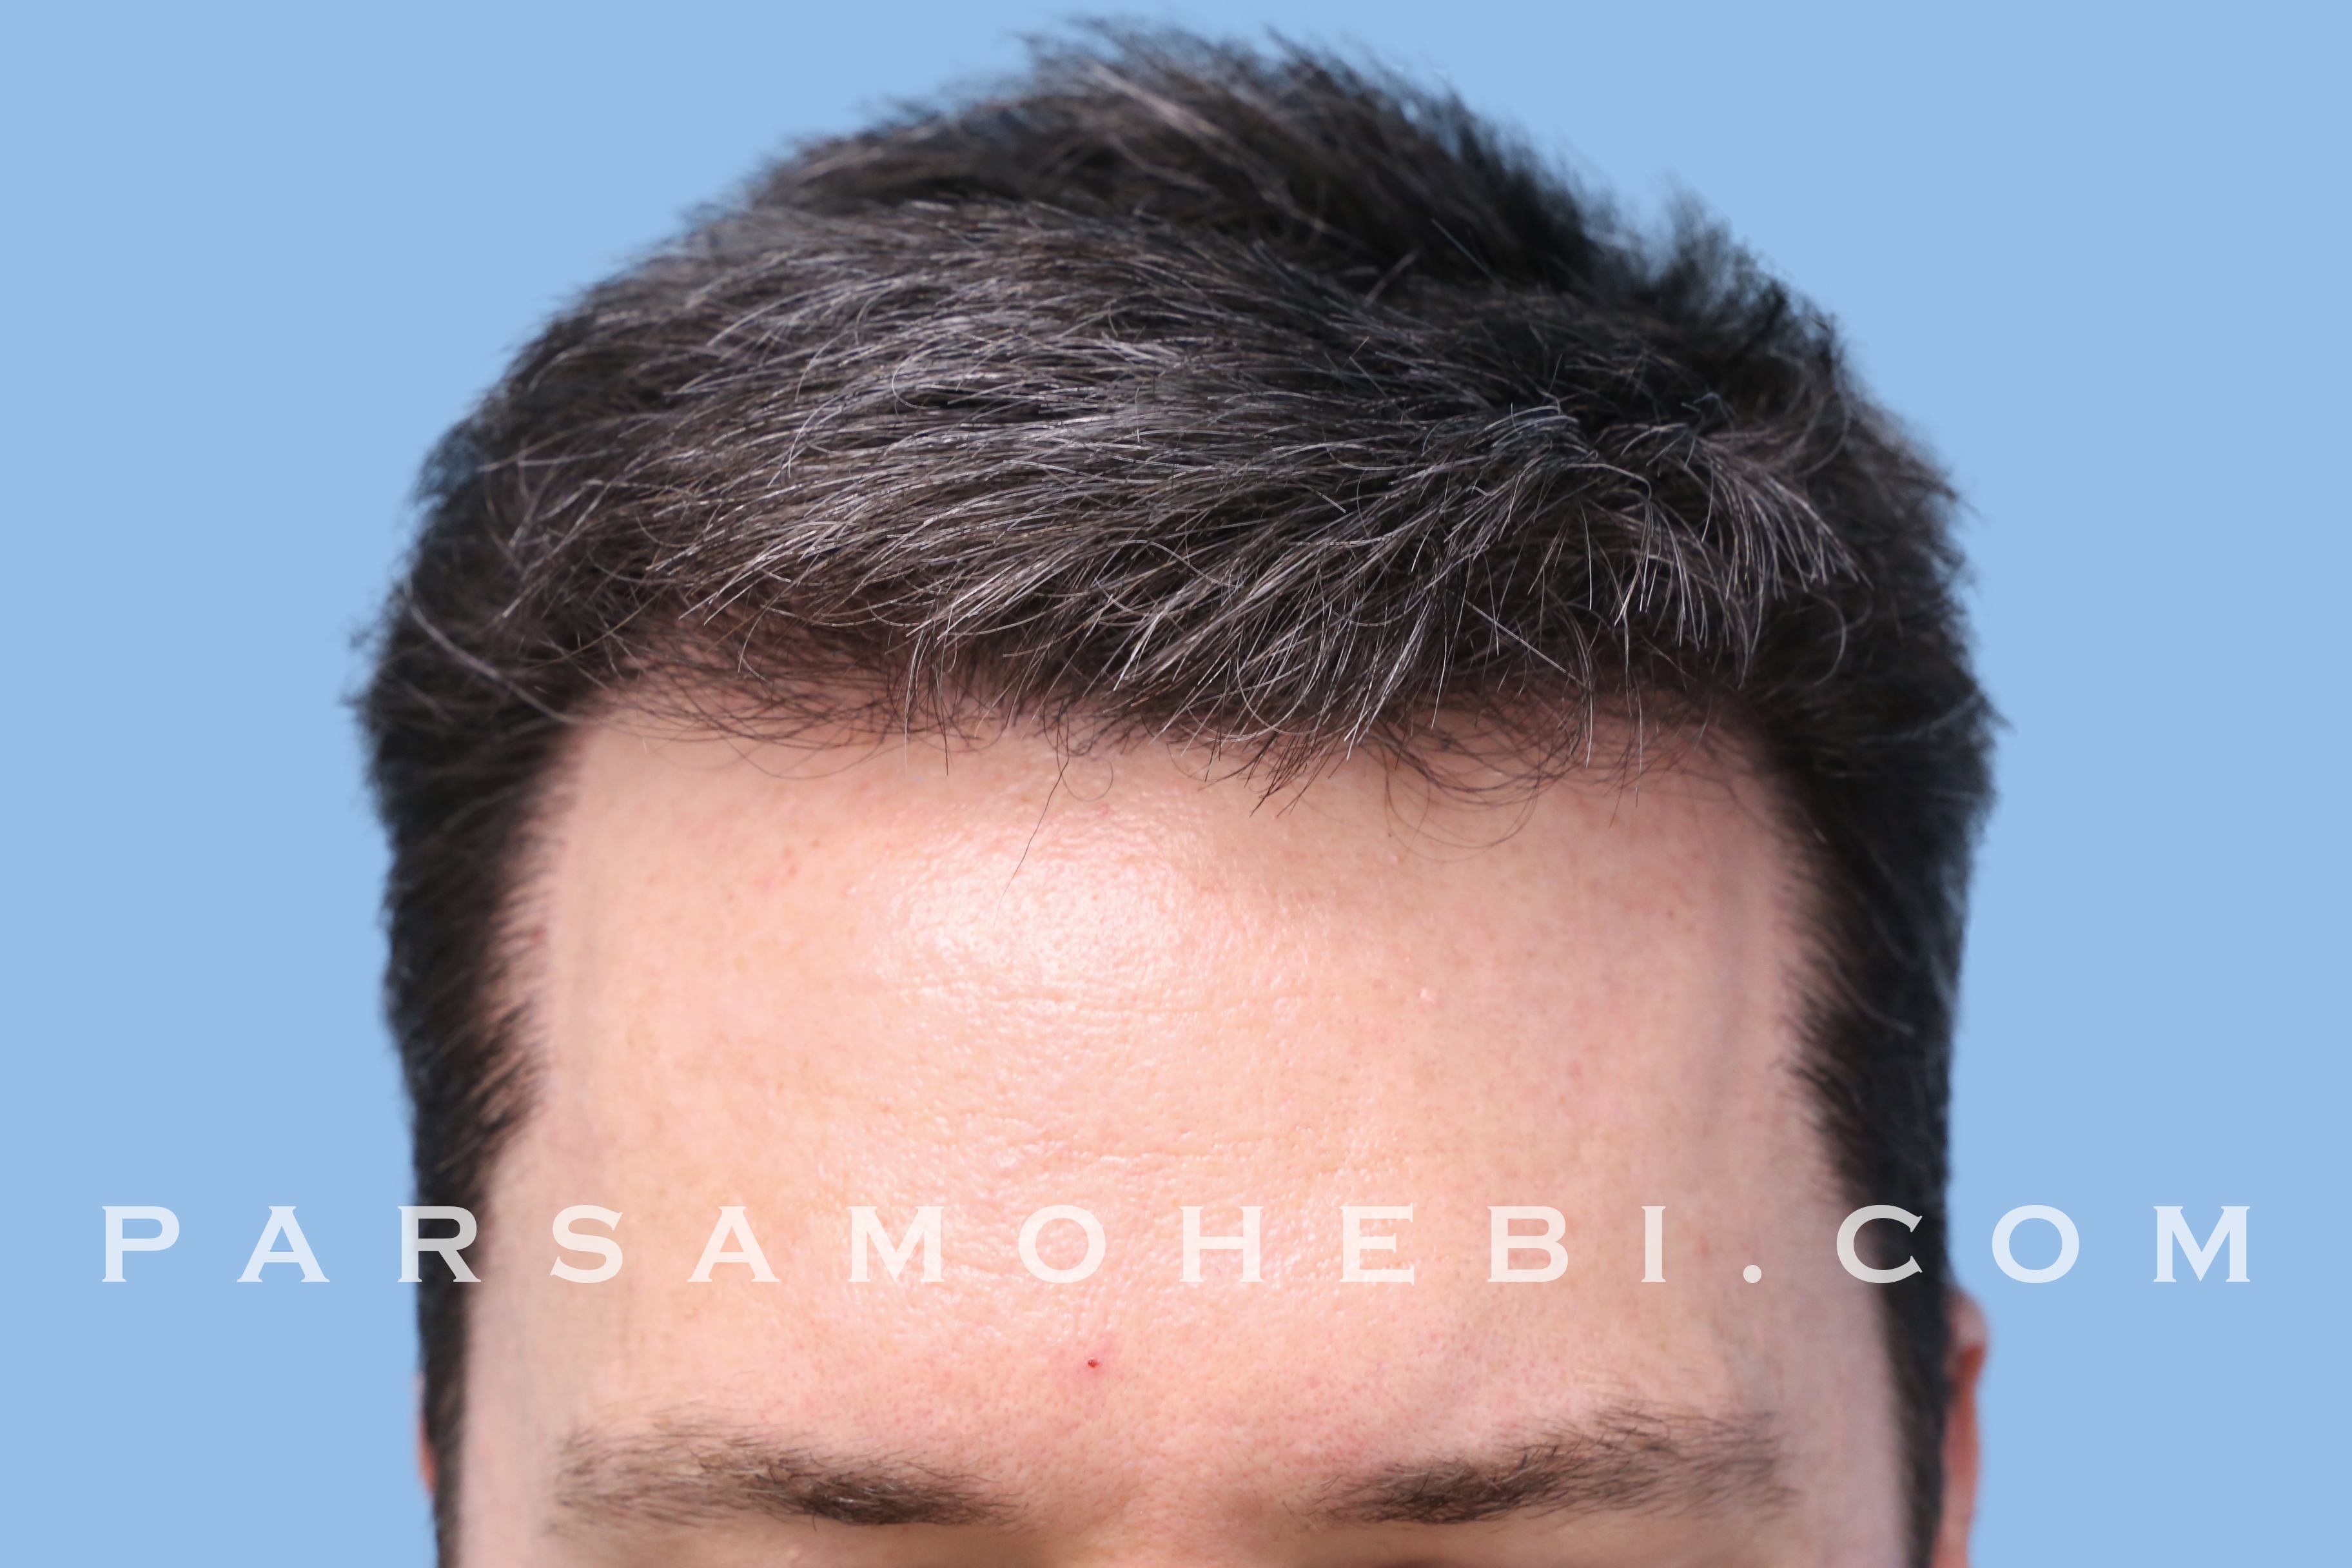 Before and After FUE Hair Transplant (2,179). One Procedure. 8 Months  Elapsed - Parsa Mohebi Hair Restoration - Parsa Mohebi Hair Restoration